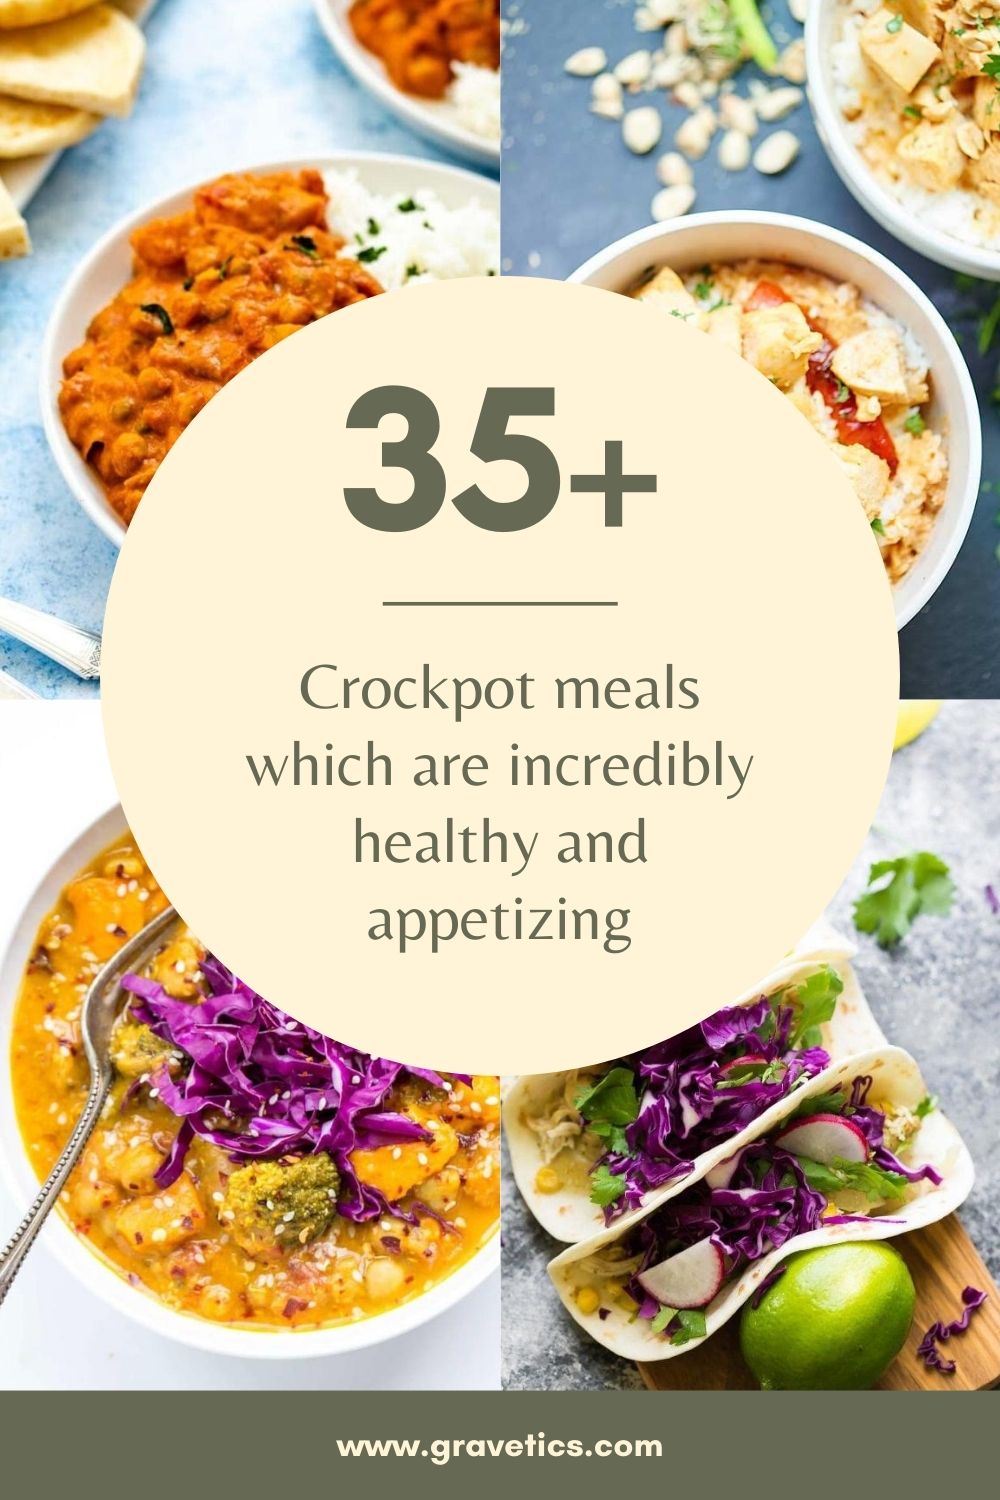 Crockpot meals which are incredibly healthy and appetizing